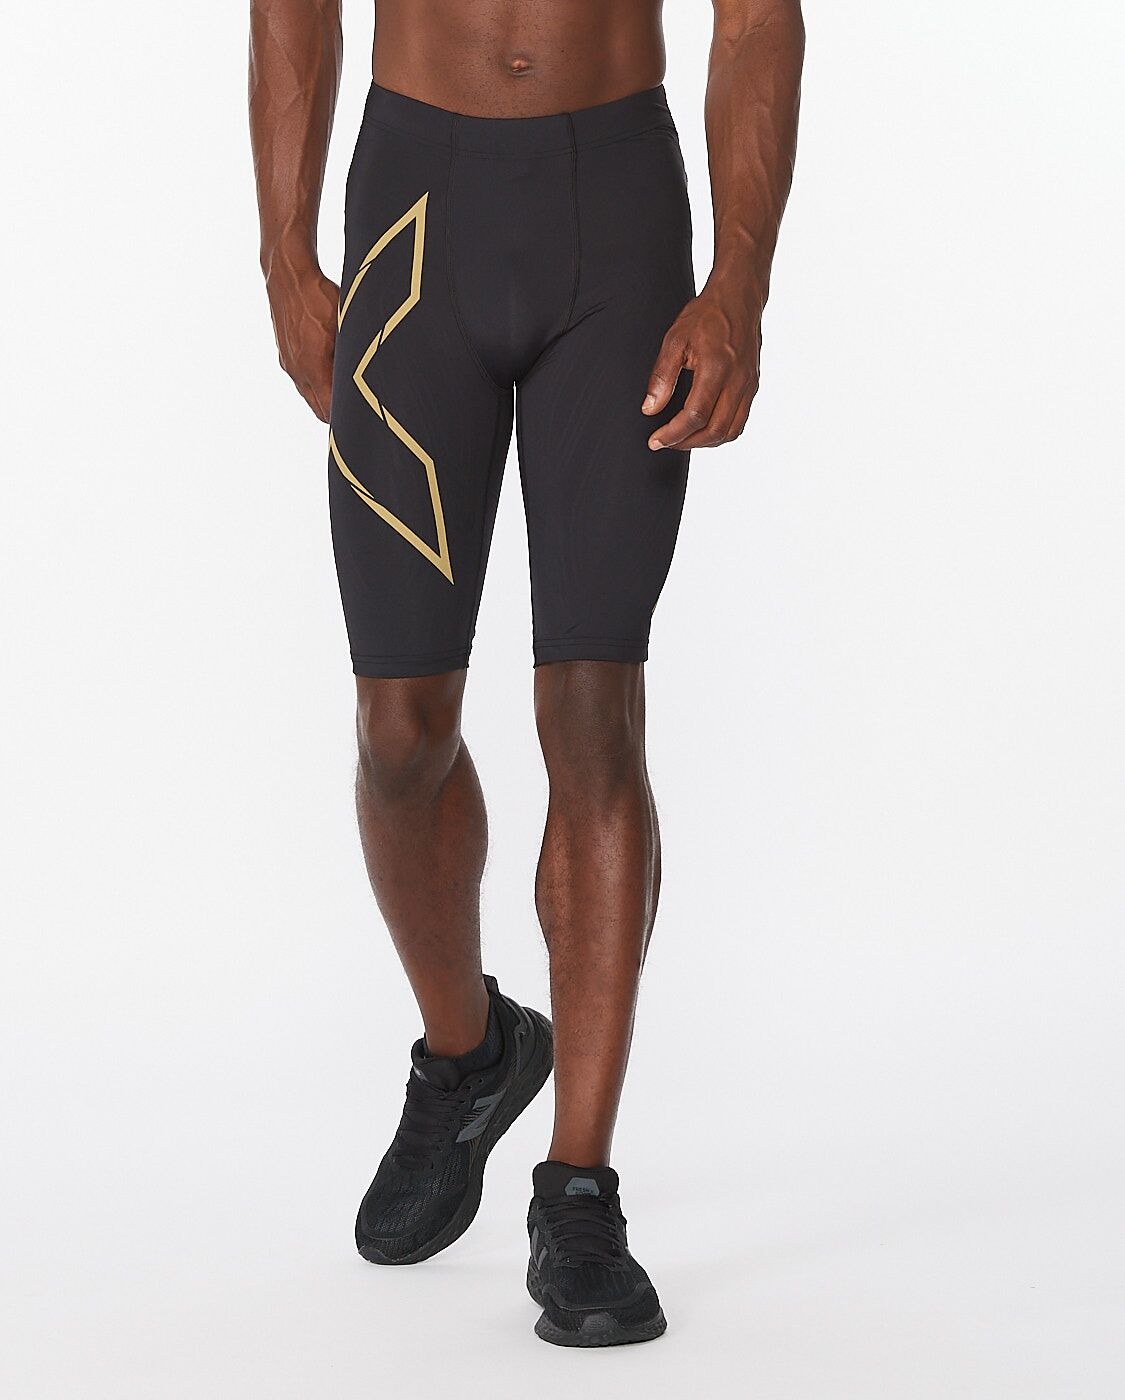 2XU Refresh - Men's Recovery Compression Tights